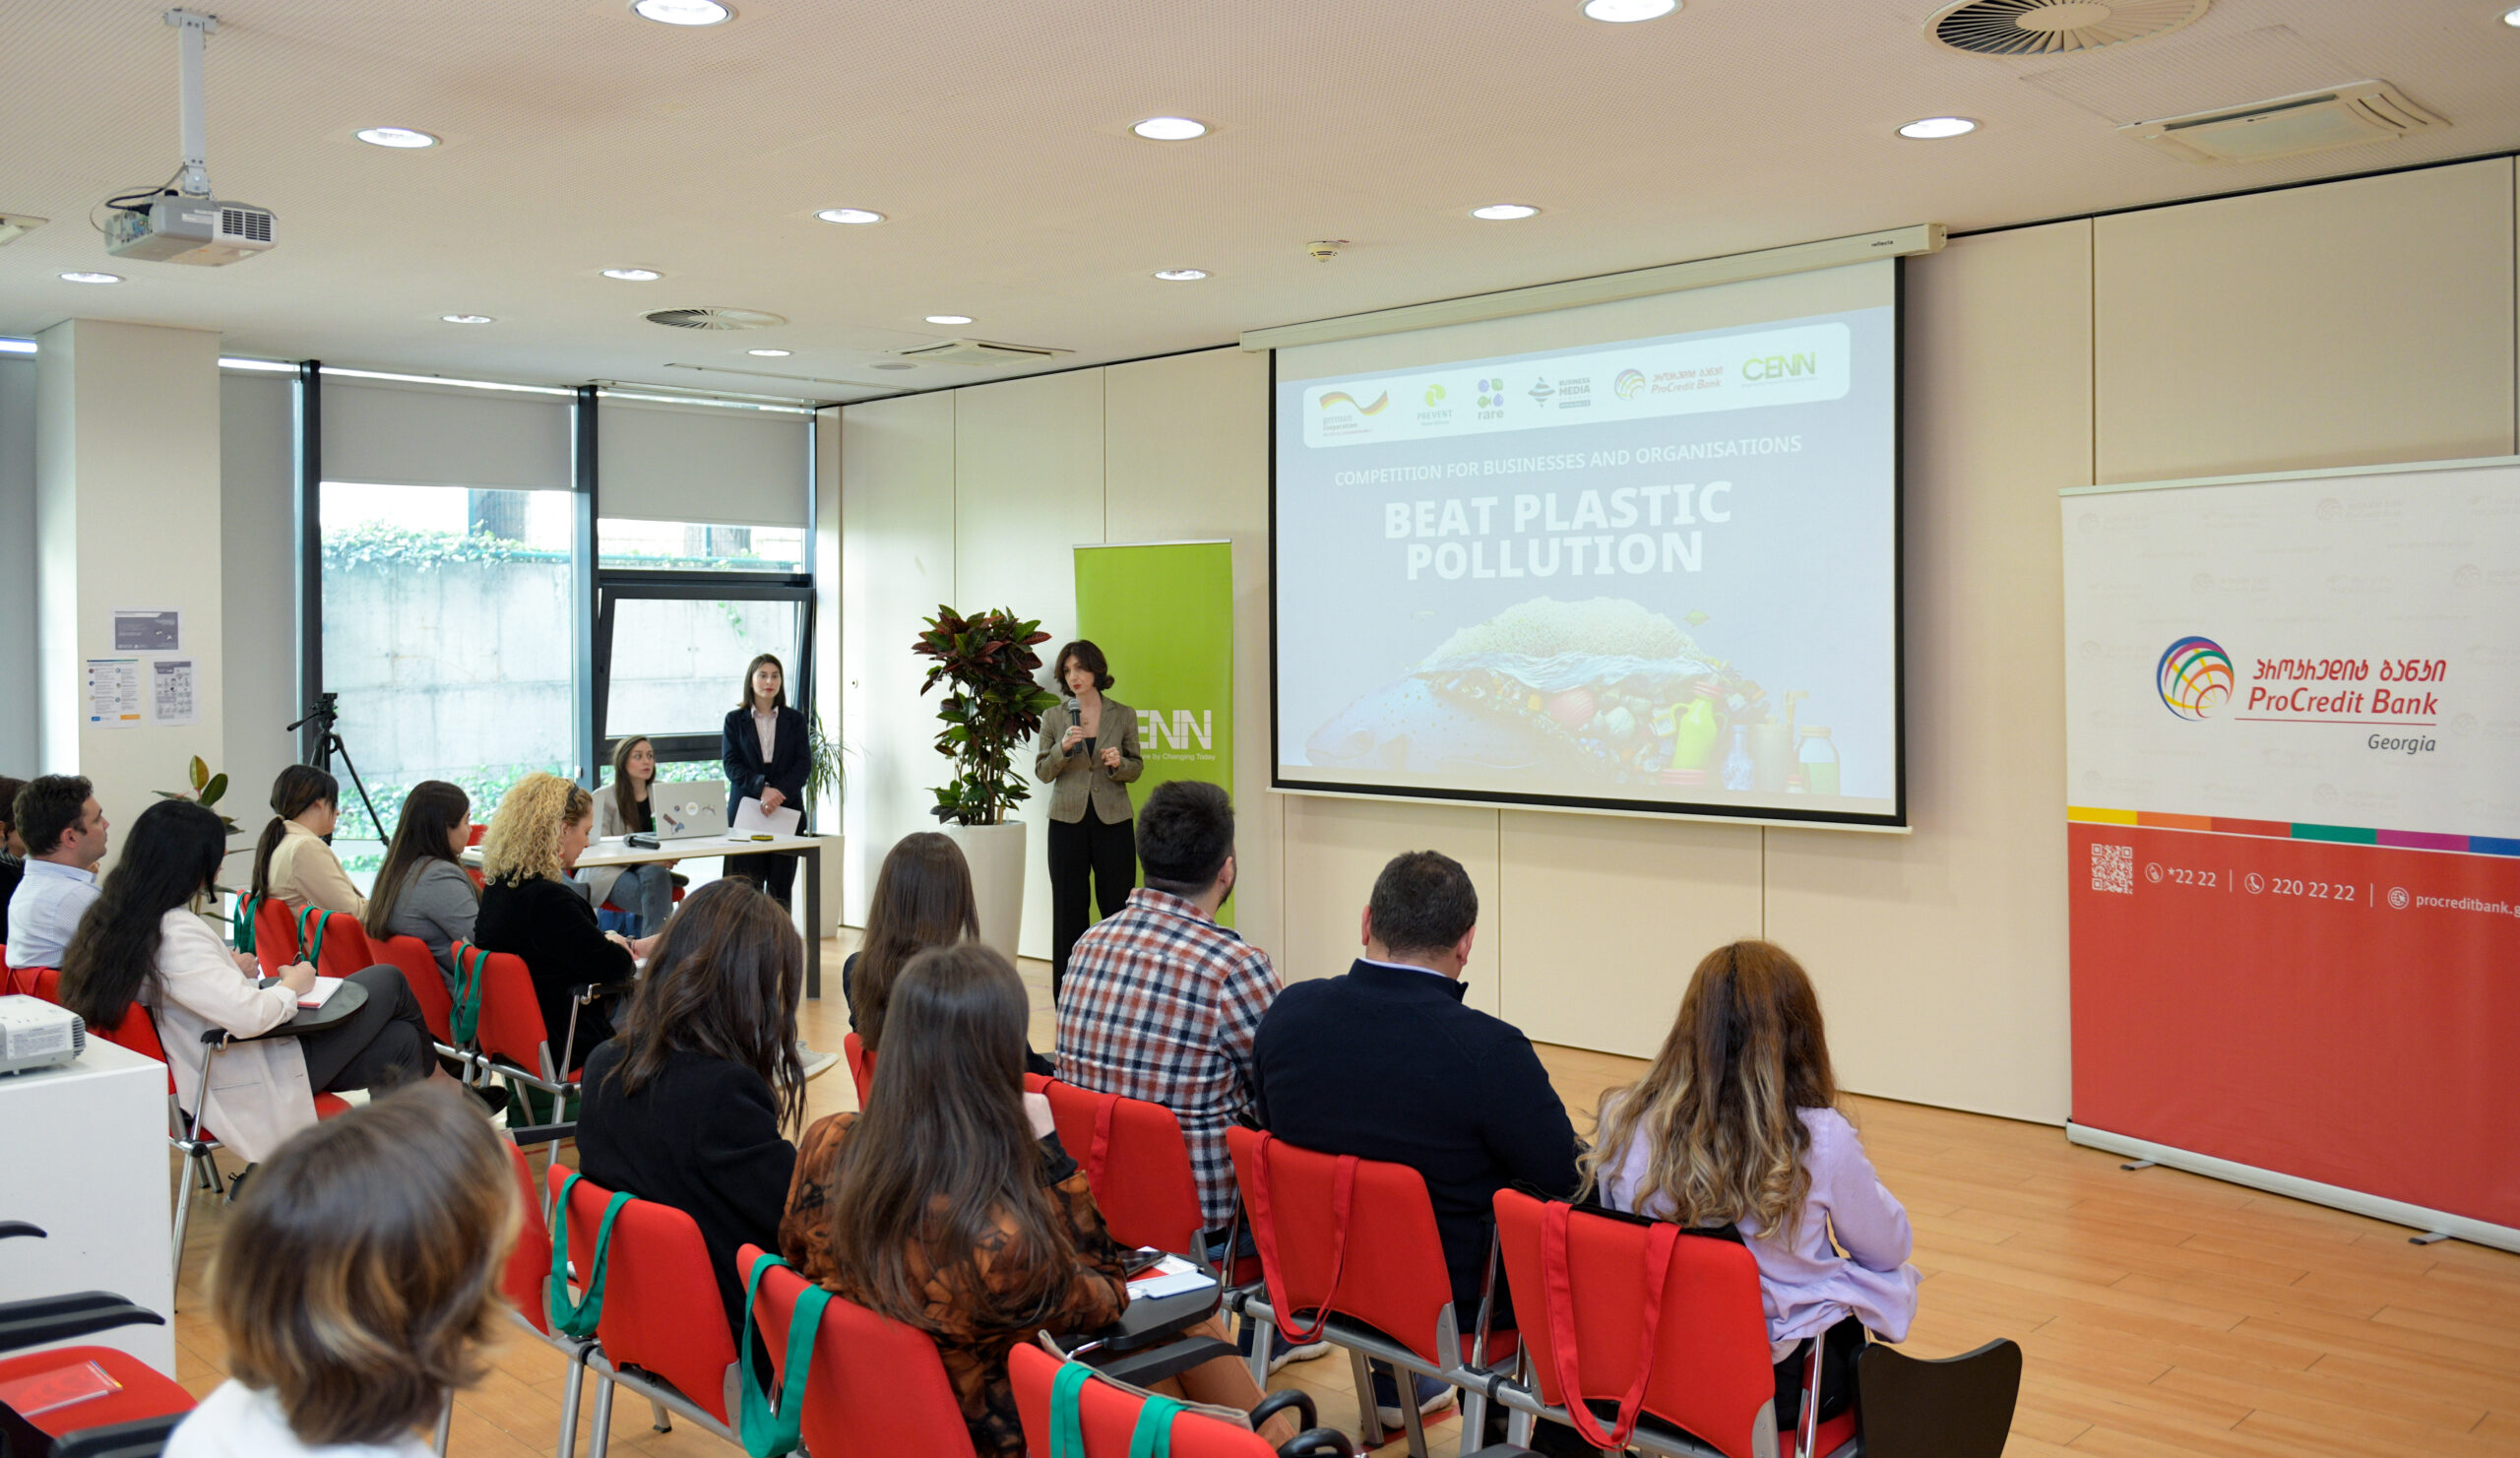 CENN in collaboration with ProCredit Bank kicked off the Beat Plastic Pollution Competition